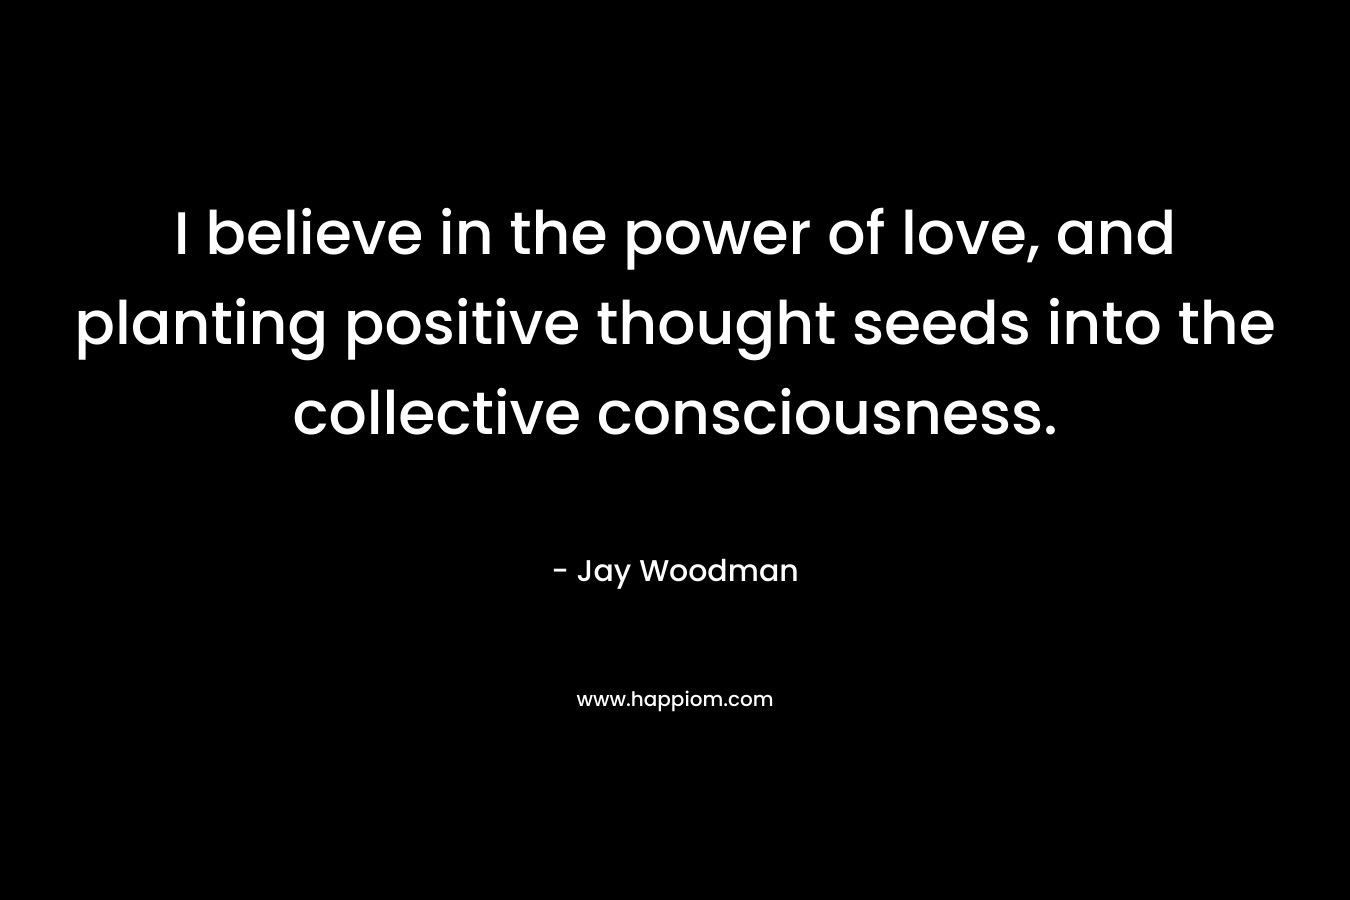 I believe in the power of love, and planting positive thought seeds into the collective consciousness. – Jay Woodman